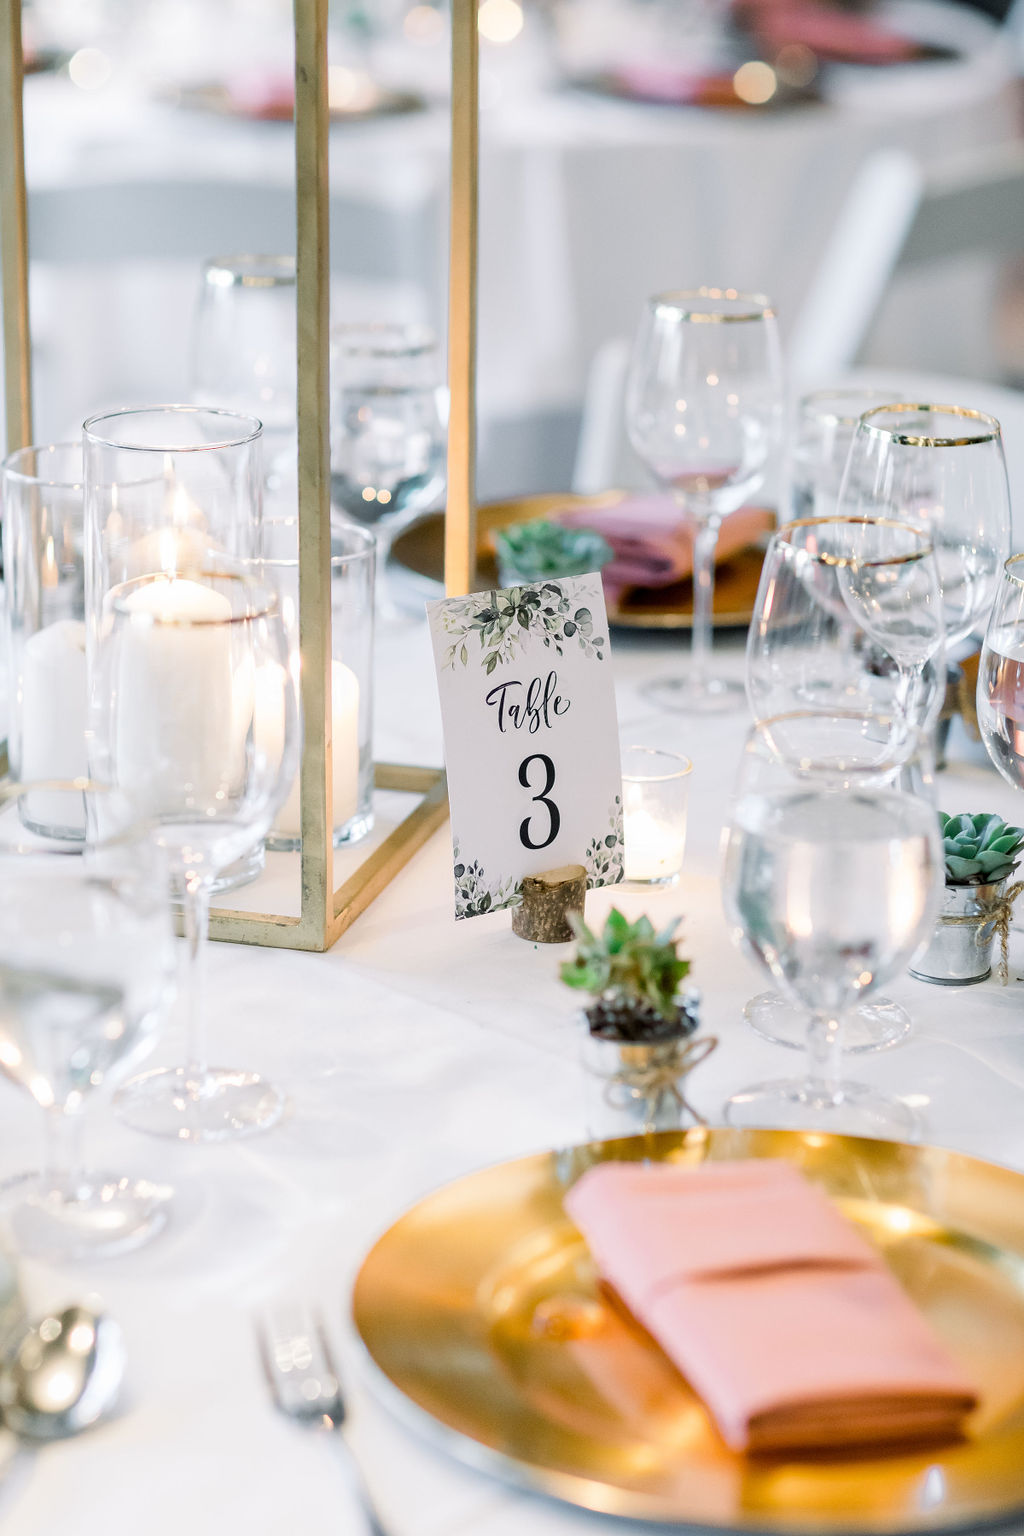 table number in wooden block